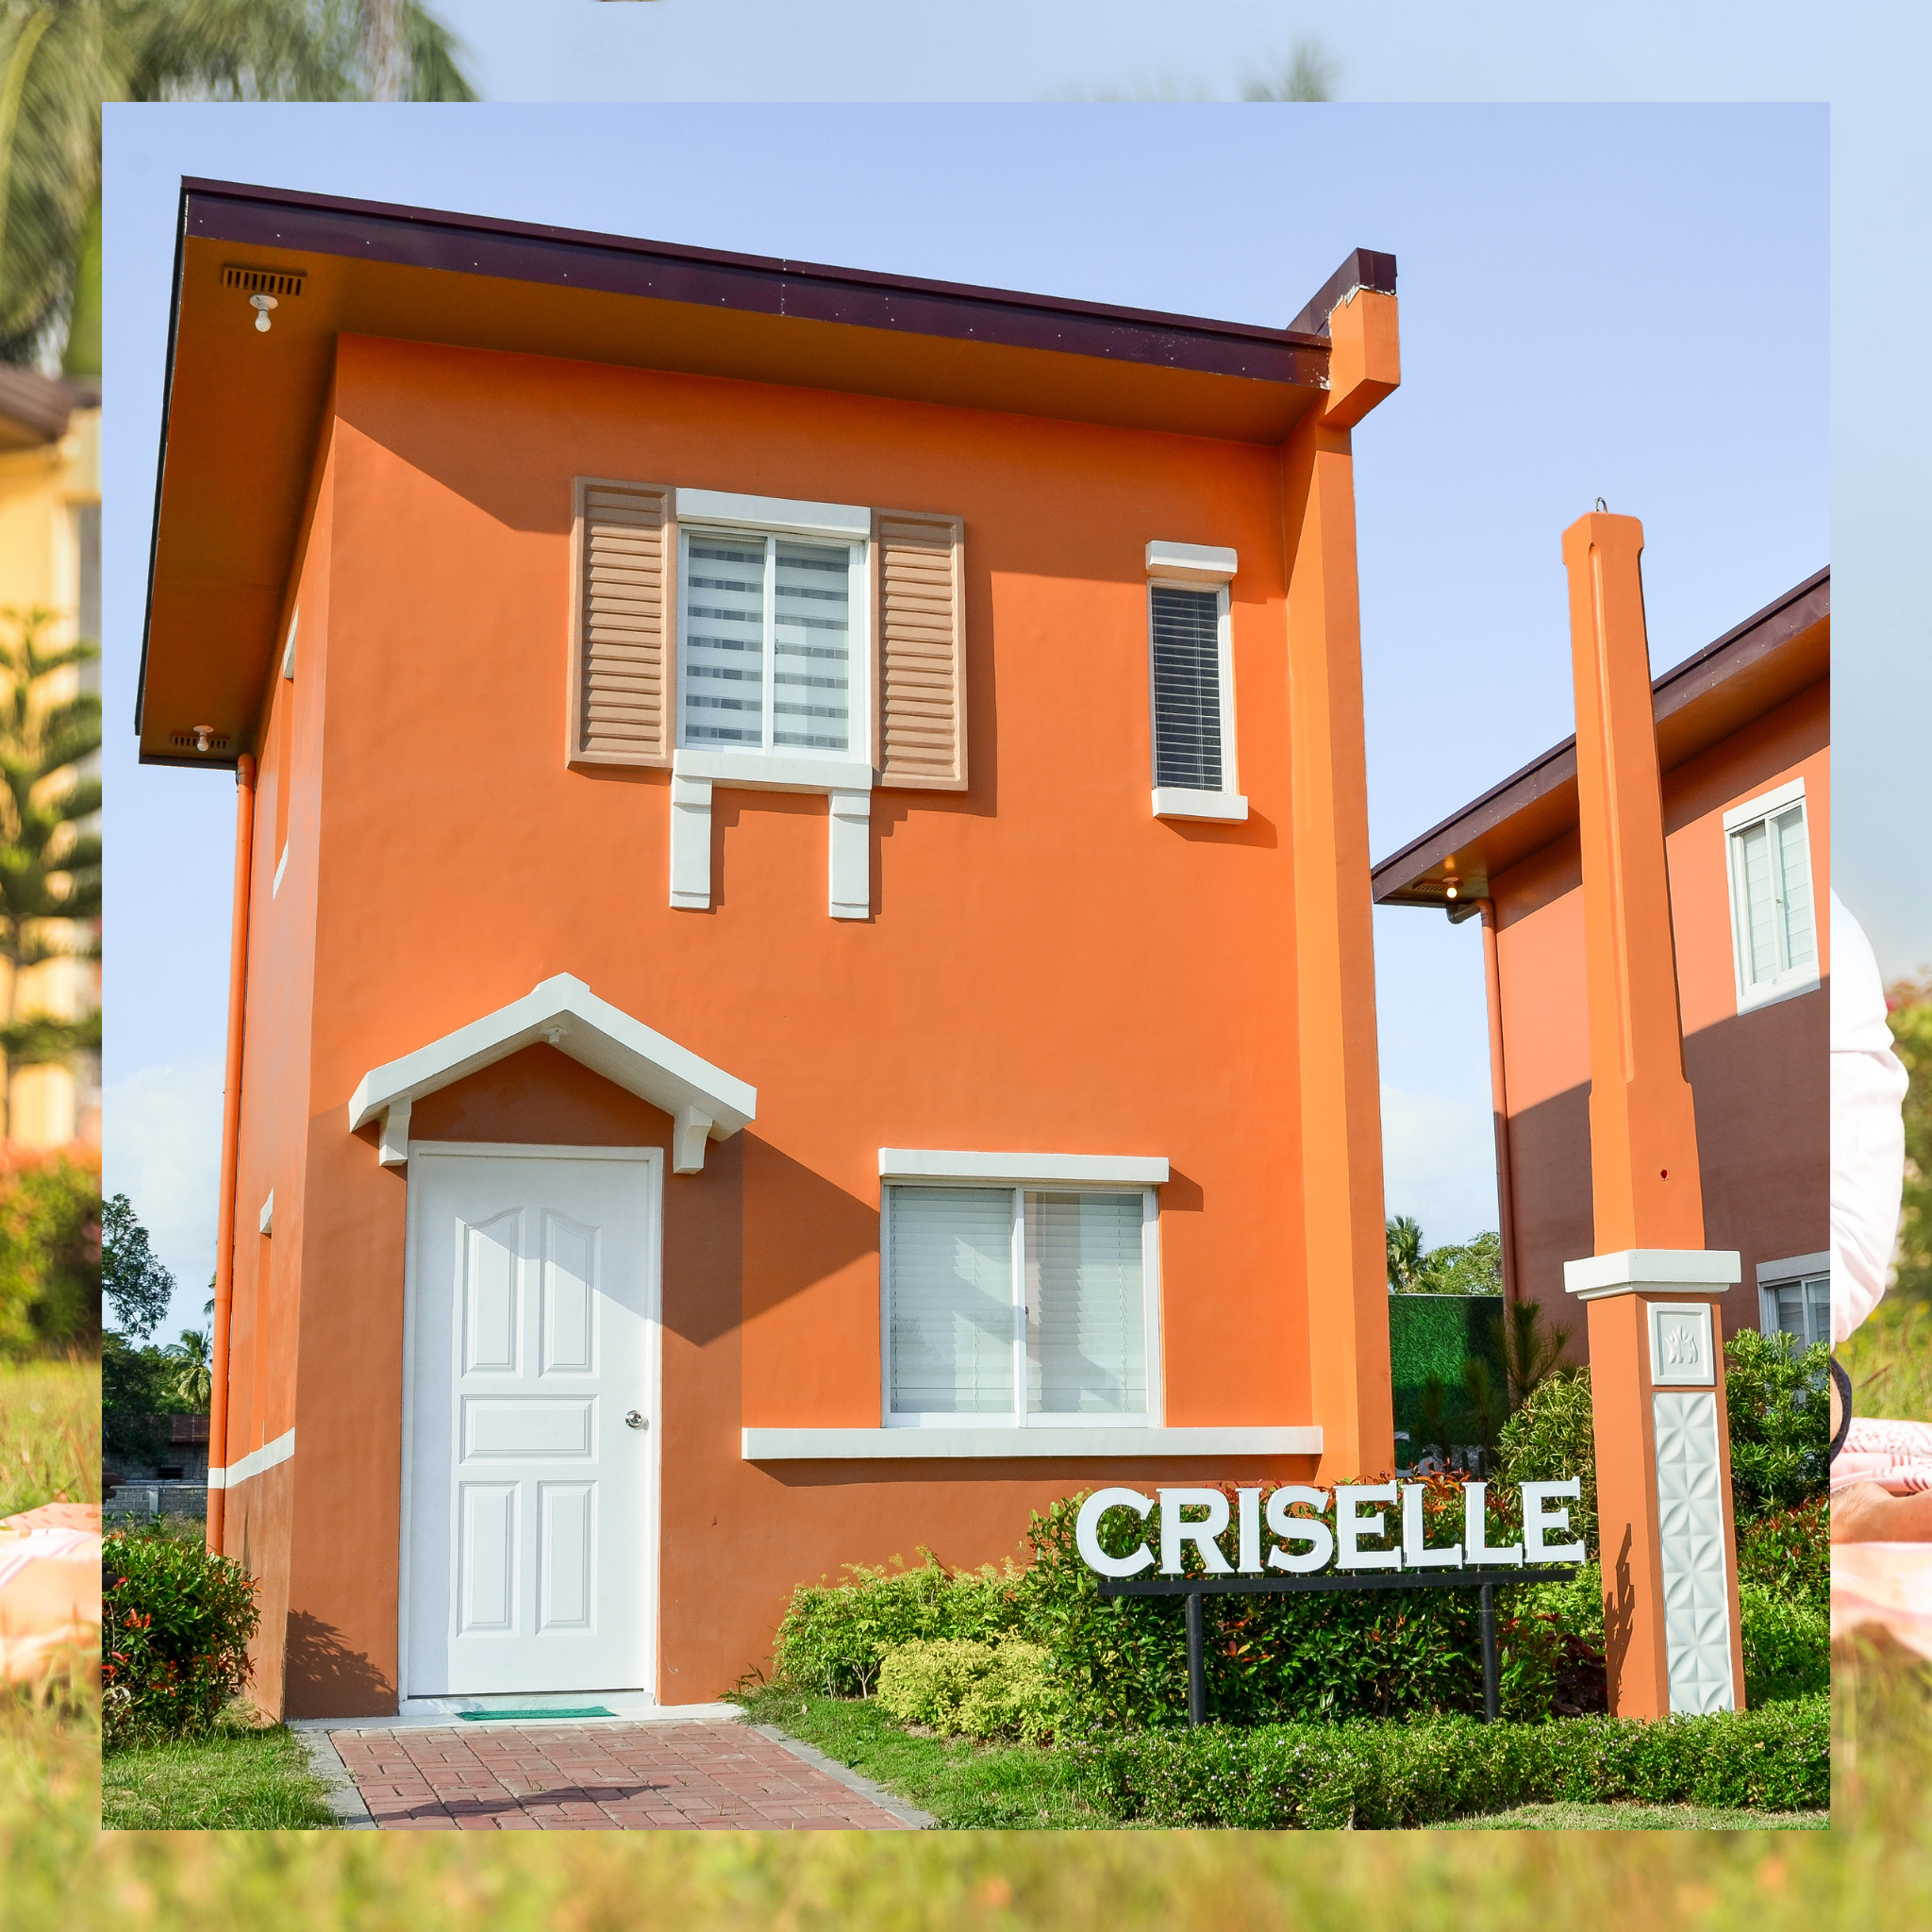 2BR Affordable House and Lot For Sale in San Juan Batangas – Criselle 60sqm